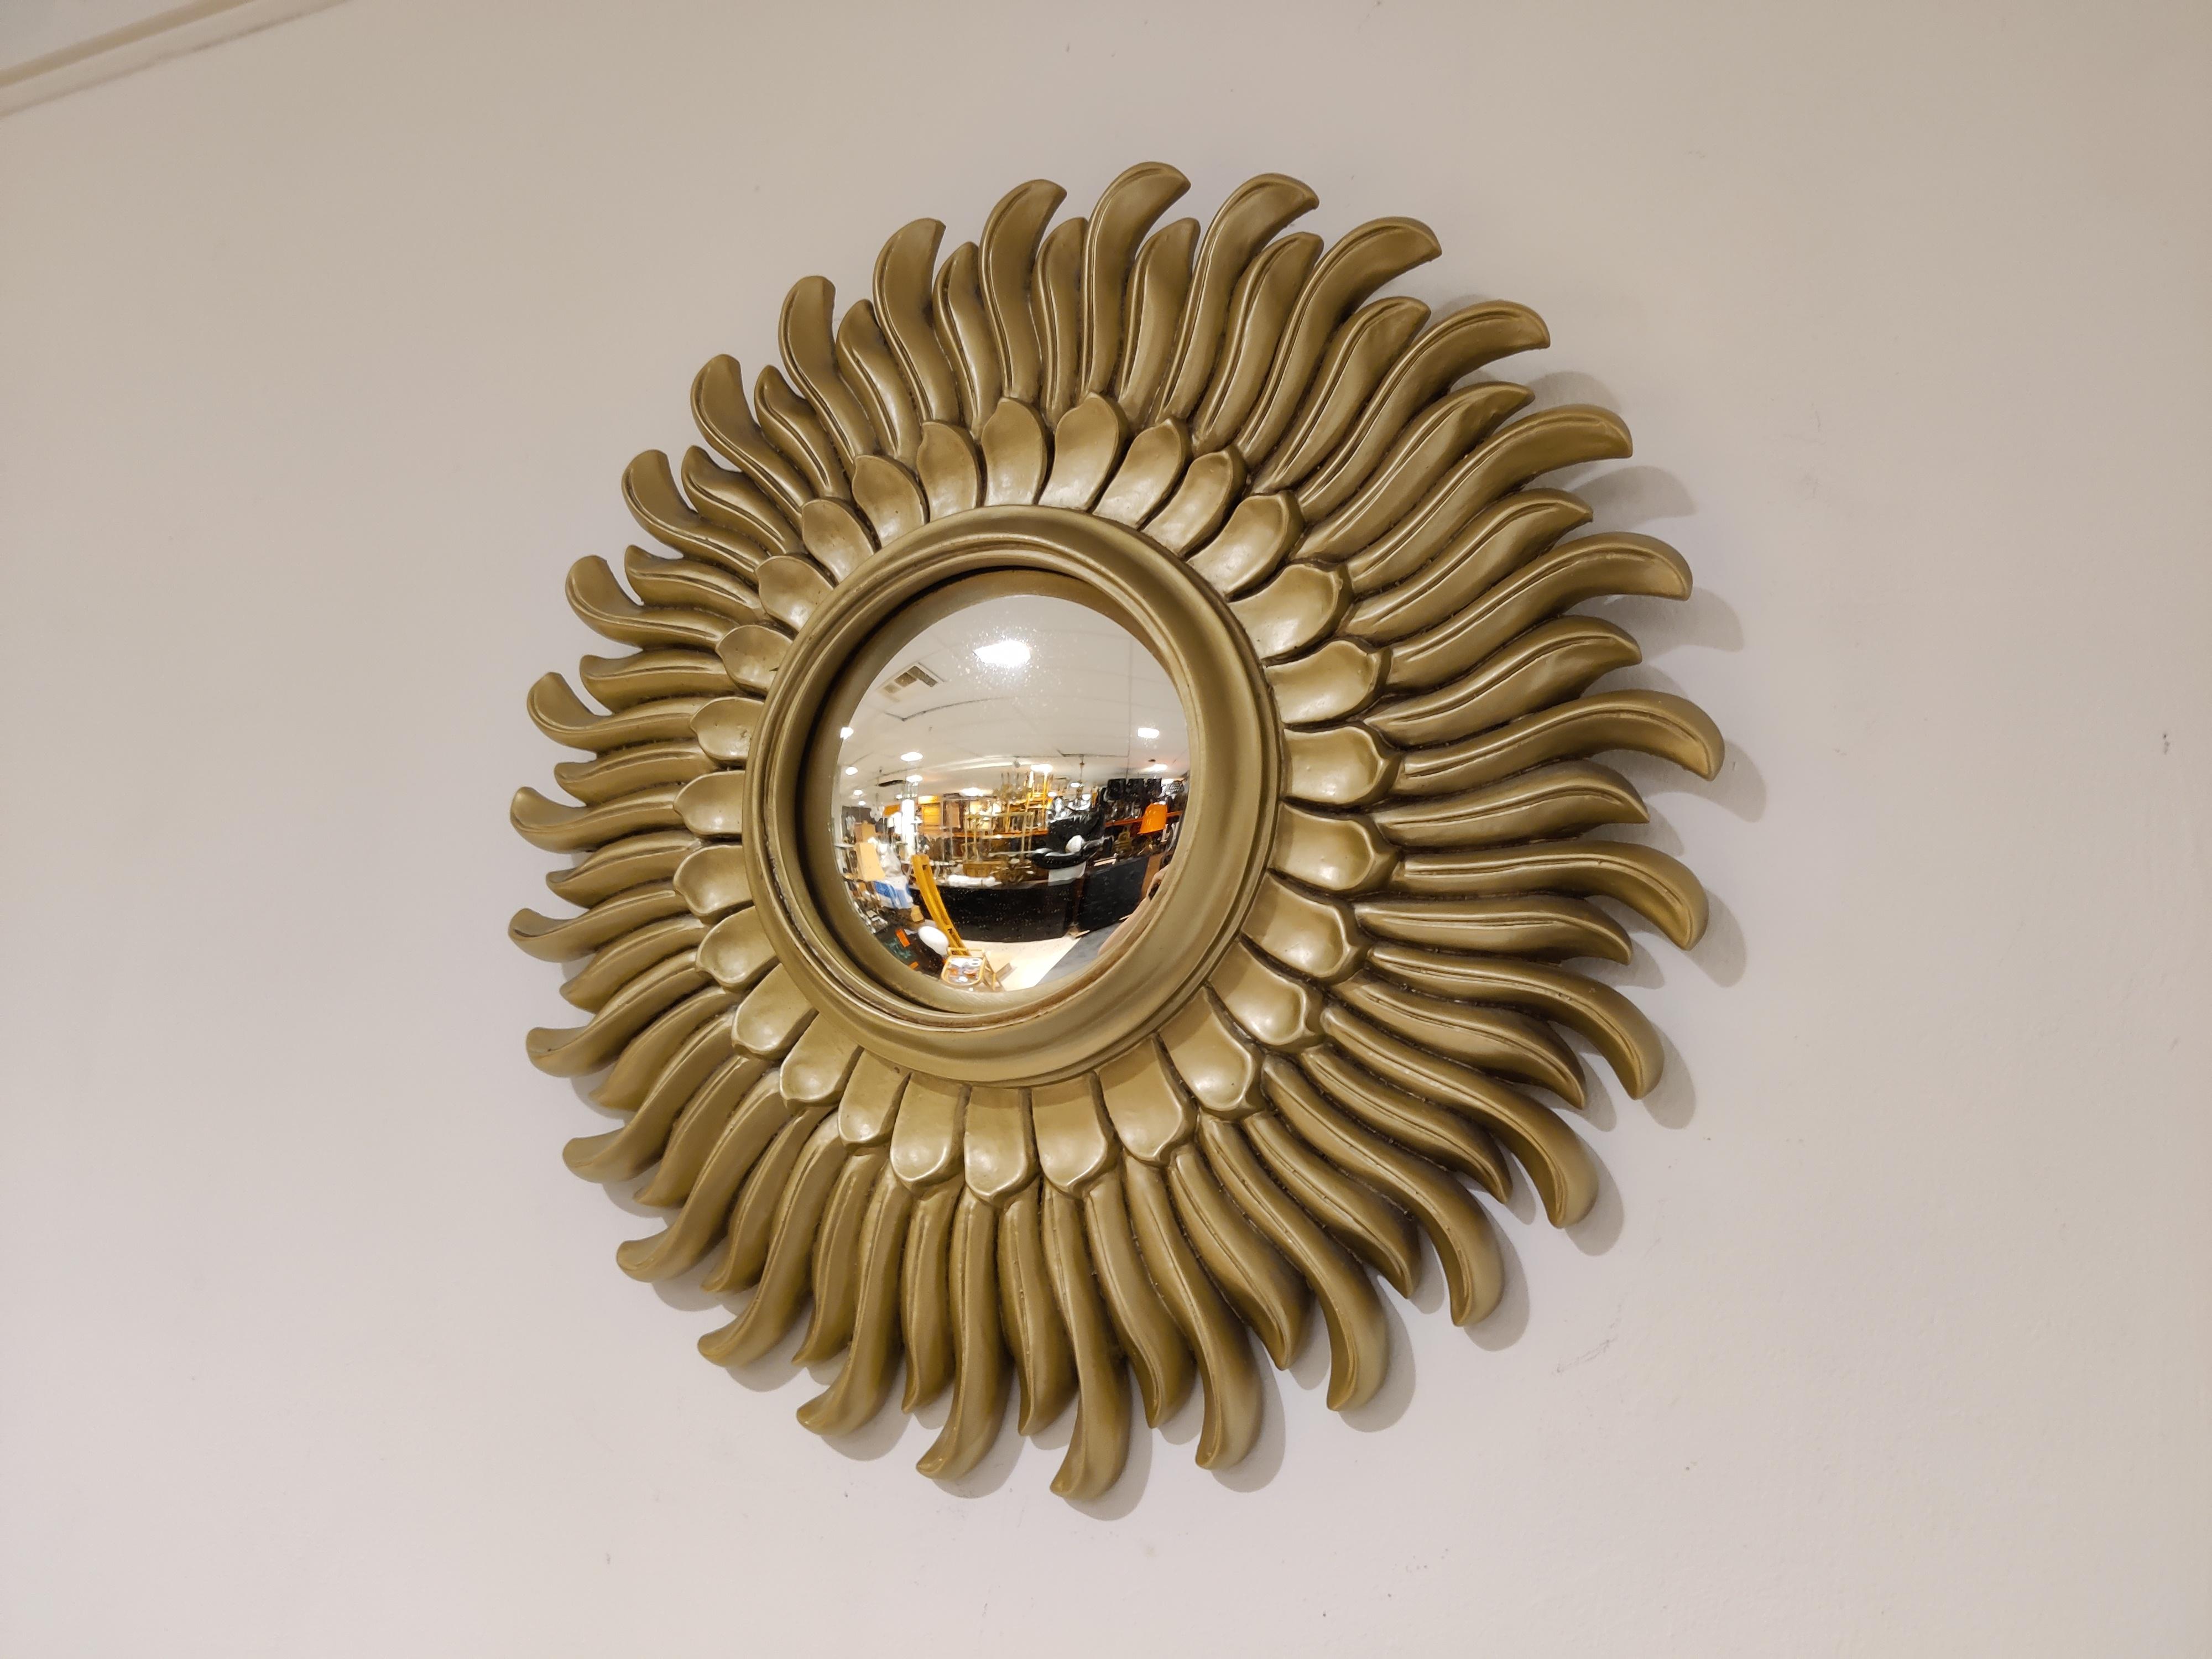 Resin sunburst mirror with convex mirror glass.

The golden mirror is in a good overall condition.

Beautiful eye catching mirror.

1960s - Belgium

Dimensions:

Diameter: 40cm/15.74